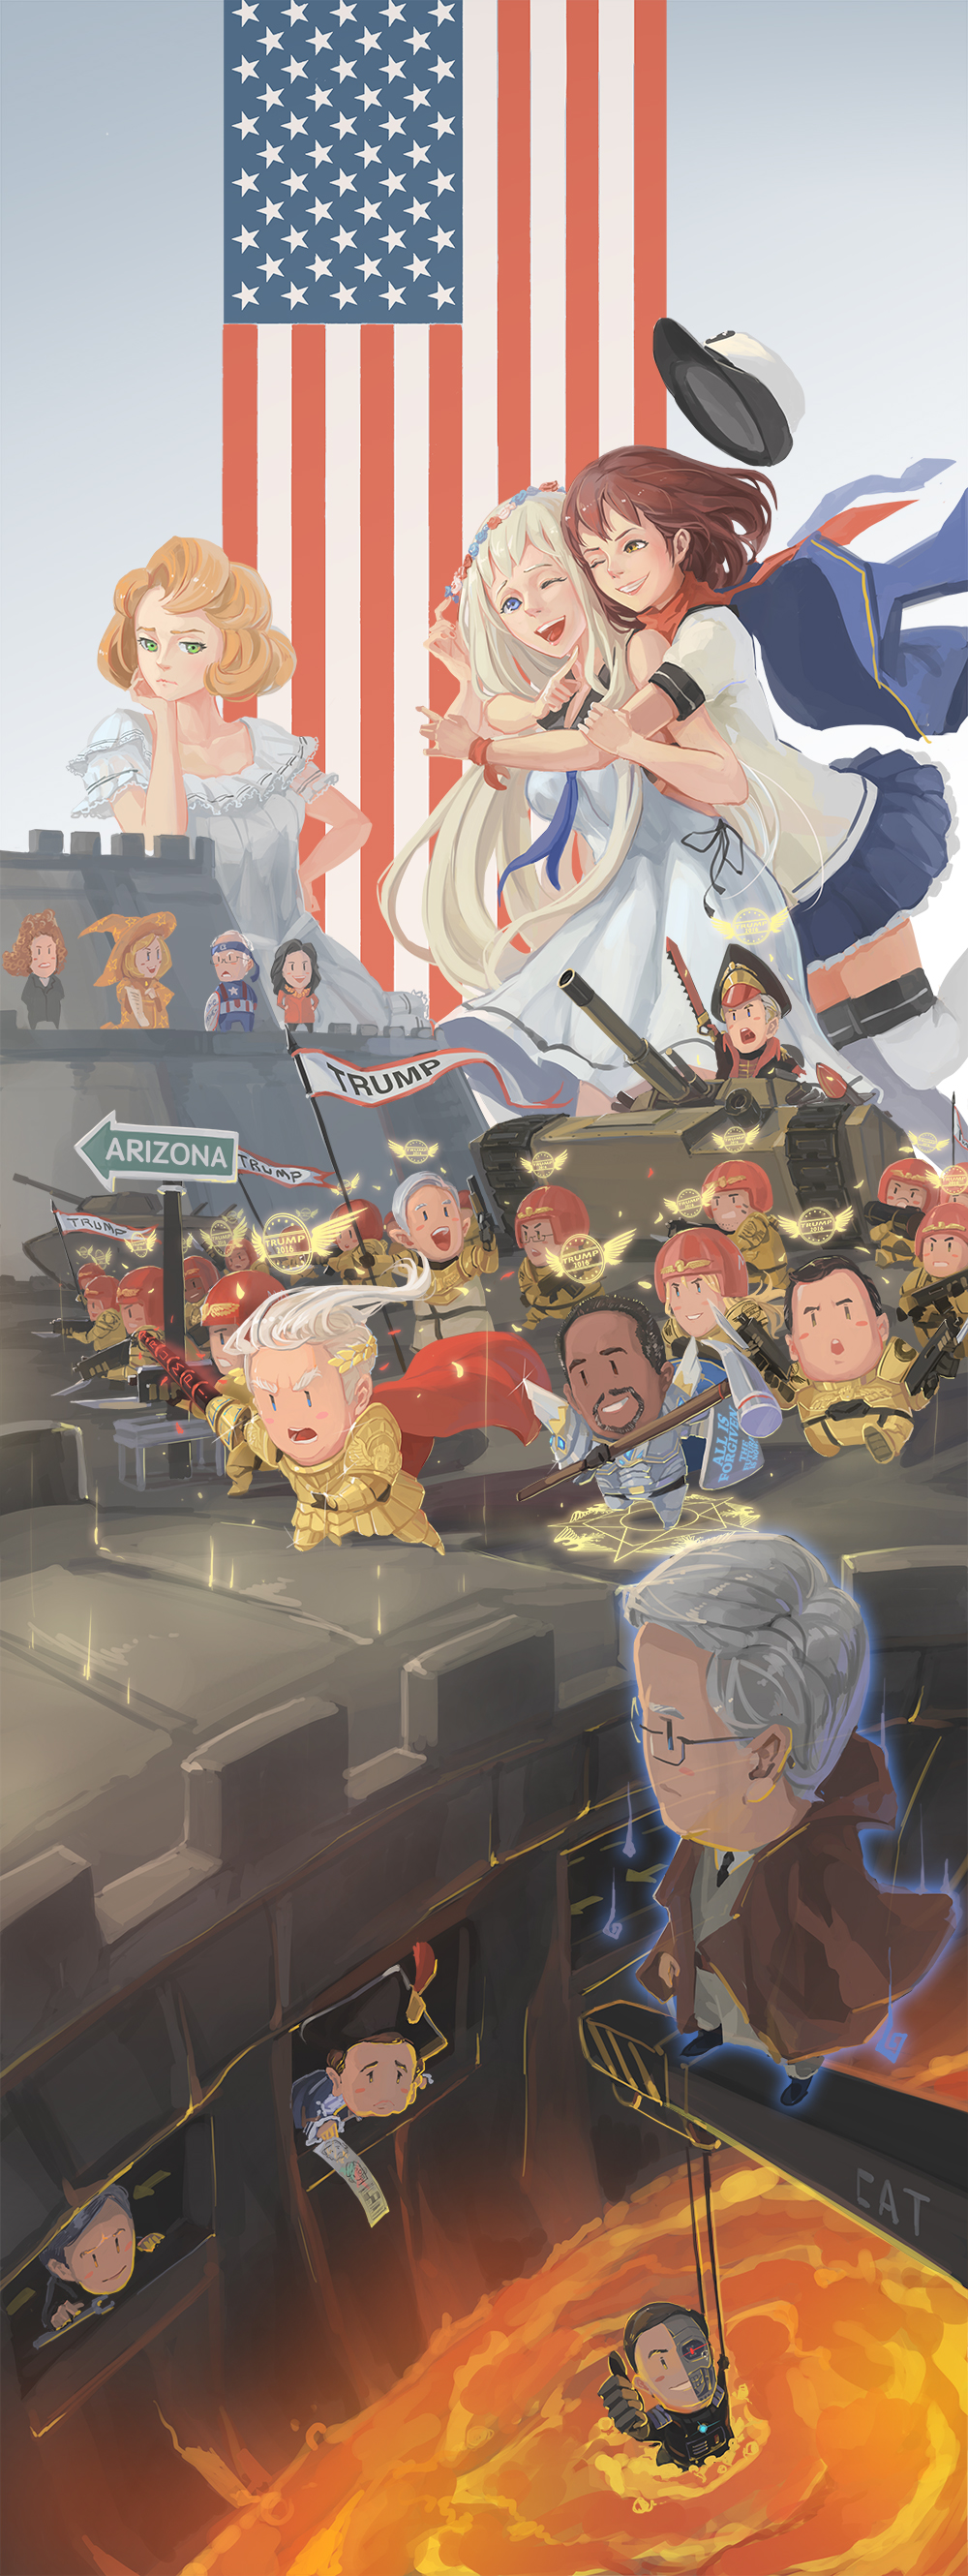 american_flag apron battle bayonet ben_carson bernie_sanders black_hair blonde_hair blue_eyes blue_skirt breasts captain_america captain_america_(cosplay) chibi chris_christie cocktail cocktail_glass commentary_request commissar cosplay crane cup debbie_wasserman_schultz donald_trump dreadnought dress drinking_glass ea_(fate/stay_night) emperor_of_mankind emperor_of_mankind_(cosplay) eyes fate/stay_night fate_(series) gilgamesh gilgamesh_(cosplay) green_eyes ground_vehicle gun hairband hammer hat hat_removed head_in_hand headwear_removed helmet highres hillary_clinton hug hug_from_behind imperial_guard jeb_bush john_kasich laurel_crown looking_at_viewer magic_circle marco_rubio marvel medium_breasts military military_vehicle milo_yiannopoulos missouri_(pacific) motor_vehicle multiple_boys multiple_girls musket no_gloves one_eye_closed open_mouth orange_hat pacific politician politics real_life real_life_insert rifle sideboob sima_naoteng skirt star_wars sword tank ted_cruz terminator thighhighs tulsi_gabbard uss_arizona_(bb-39) uss_florida_(bb-30) uss_missouri_(bb-63) warhammer warhammer_40k weapon white_dress white_hair white_legwear witch_hat